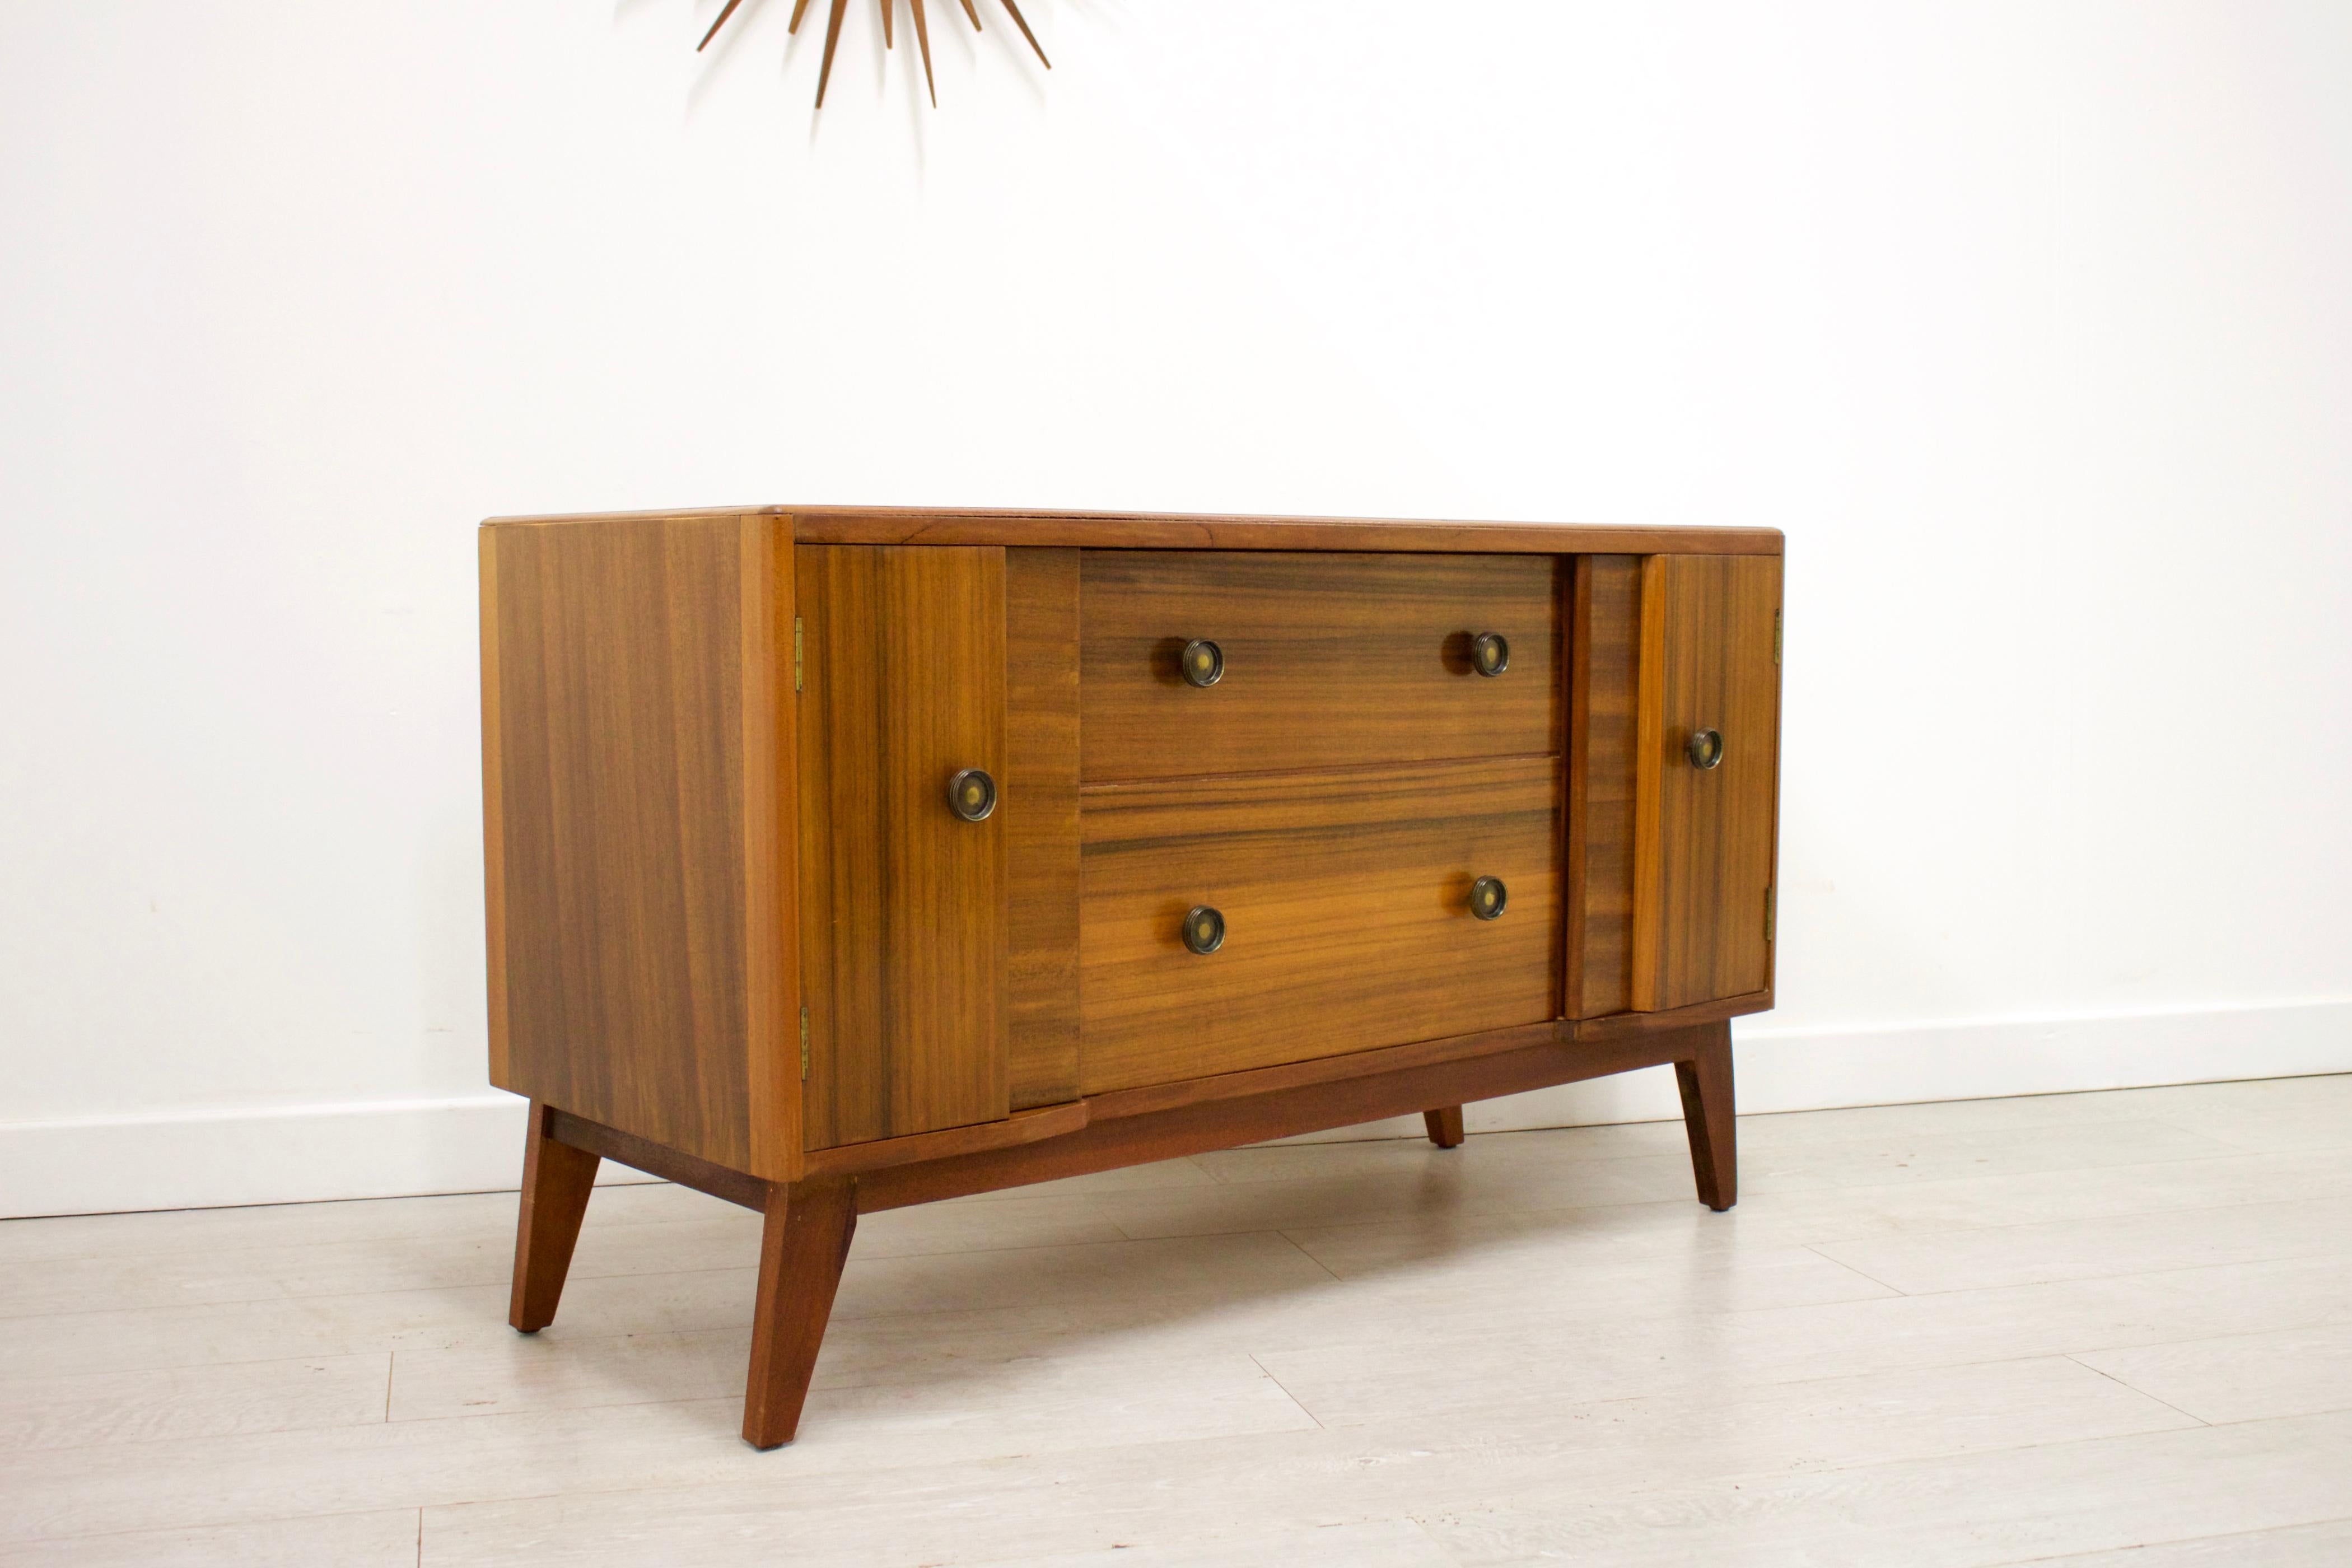 - Midcentury sideboard
- Manufactured in UK
- Made from walnut and walnut veneer
- Features 2 drawers and 2 cupboards.